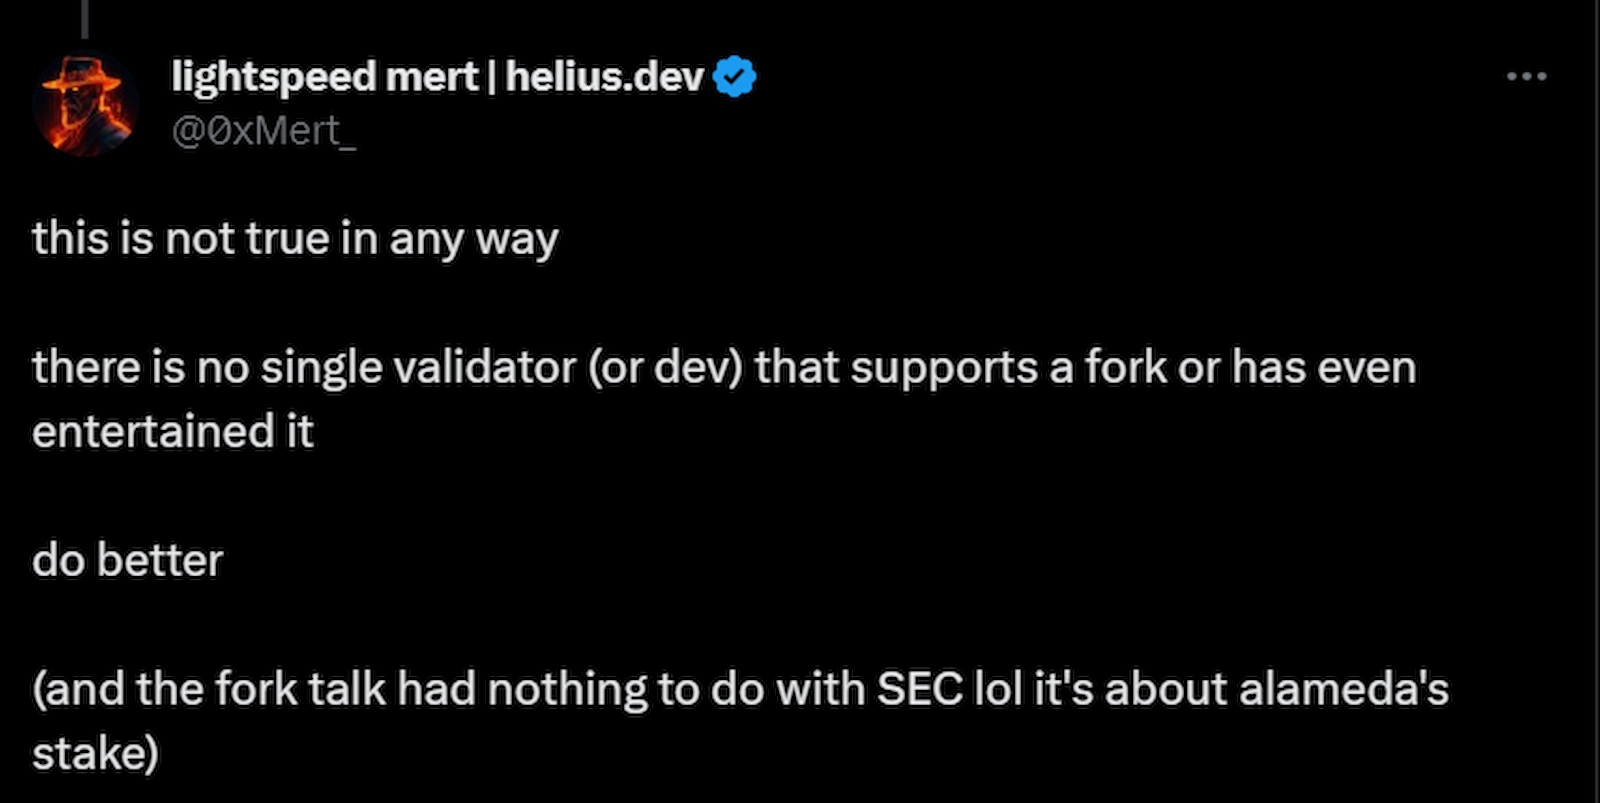 Helius Labs founder stated that Solana validators want nothing to do with a hard fork